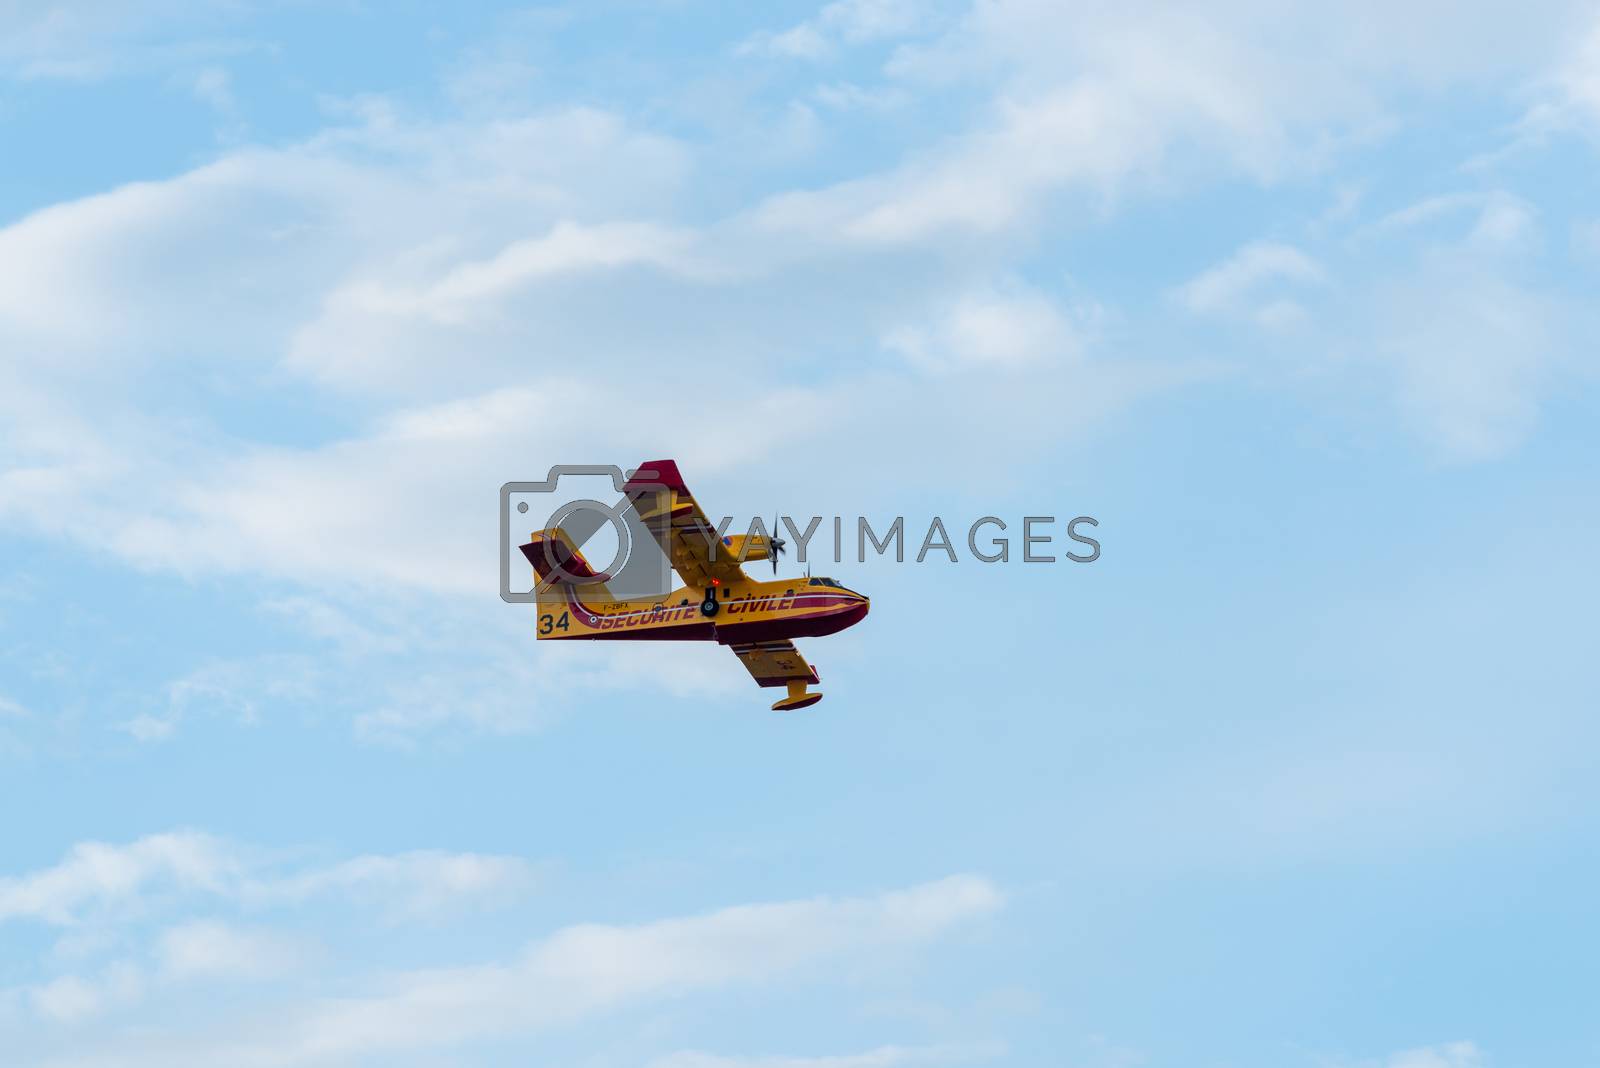 Royalty free image of Canadair CL-415 amphibious water bomber in flight by dutourdumonde